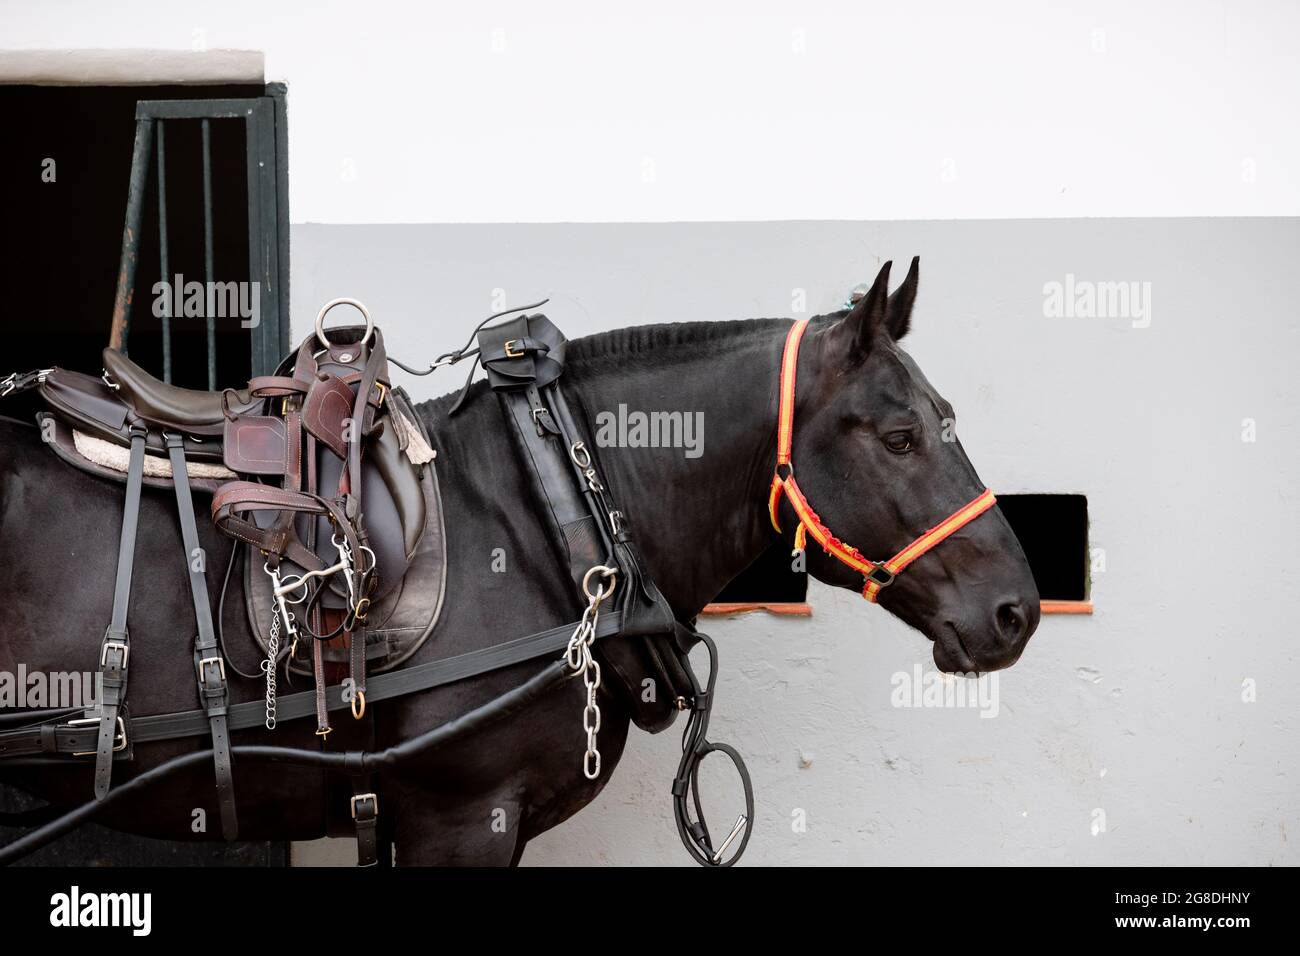 Face portrait of a black breton horse with harness, saddle and bridle Stock Photo